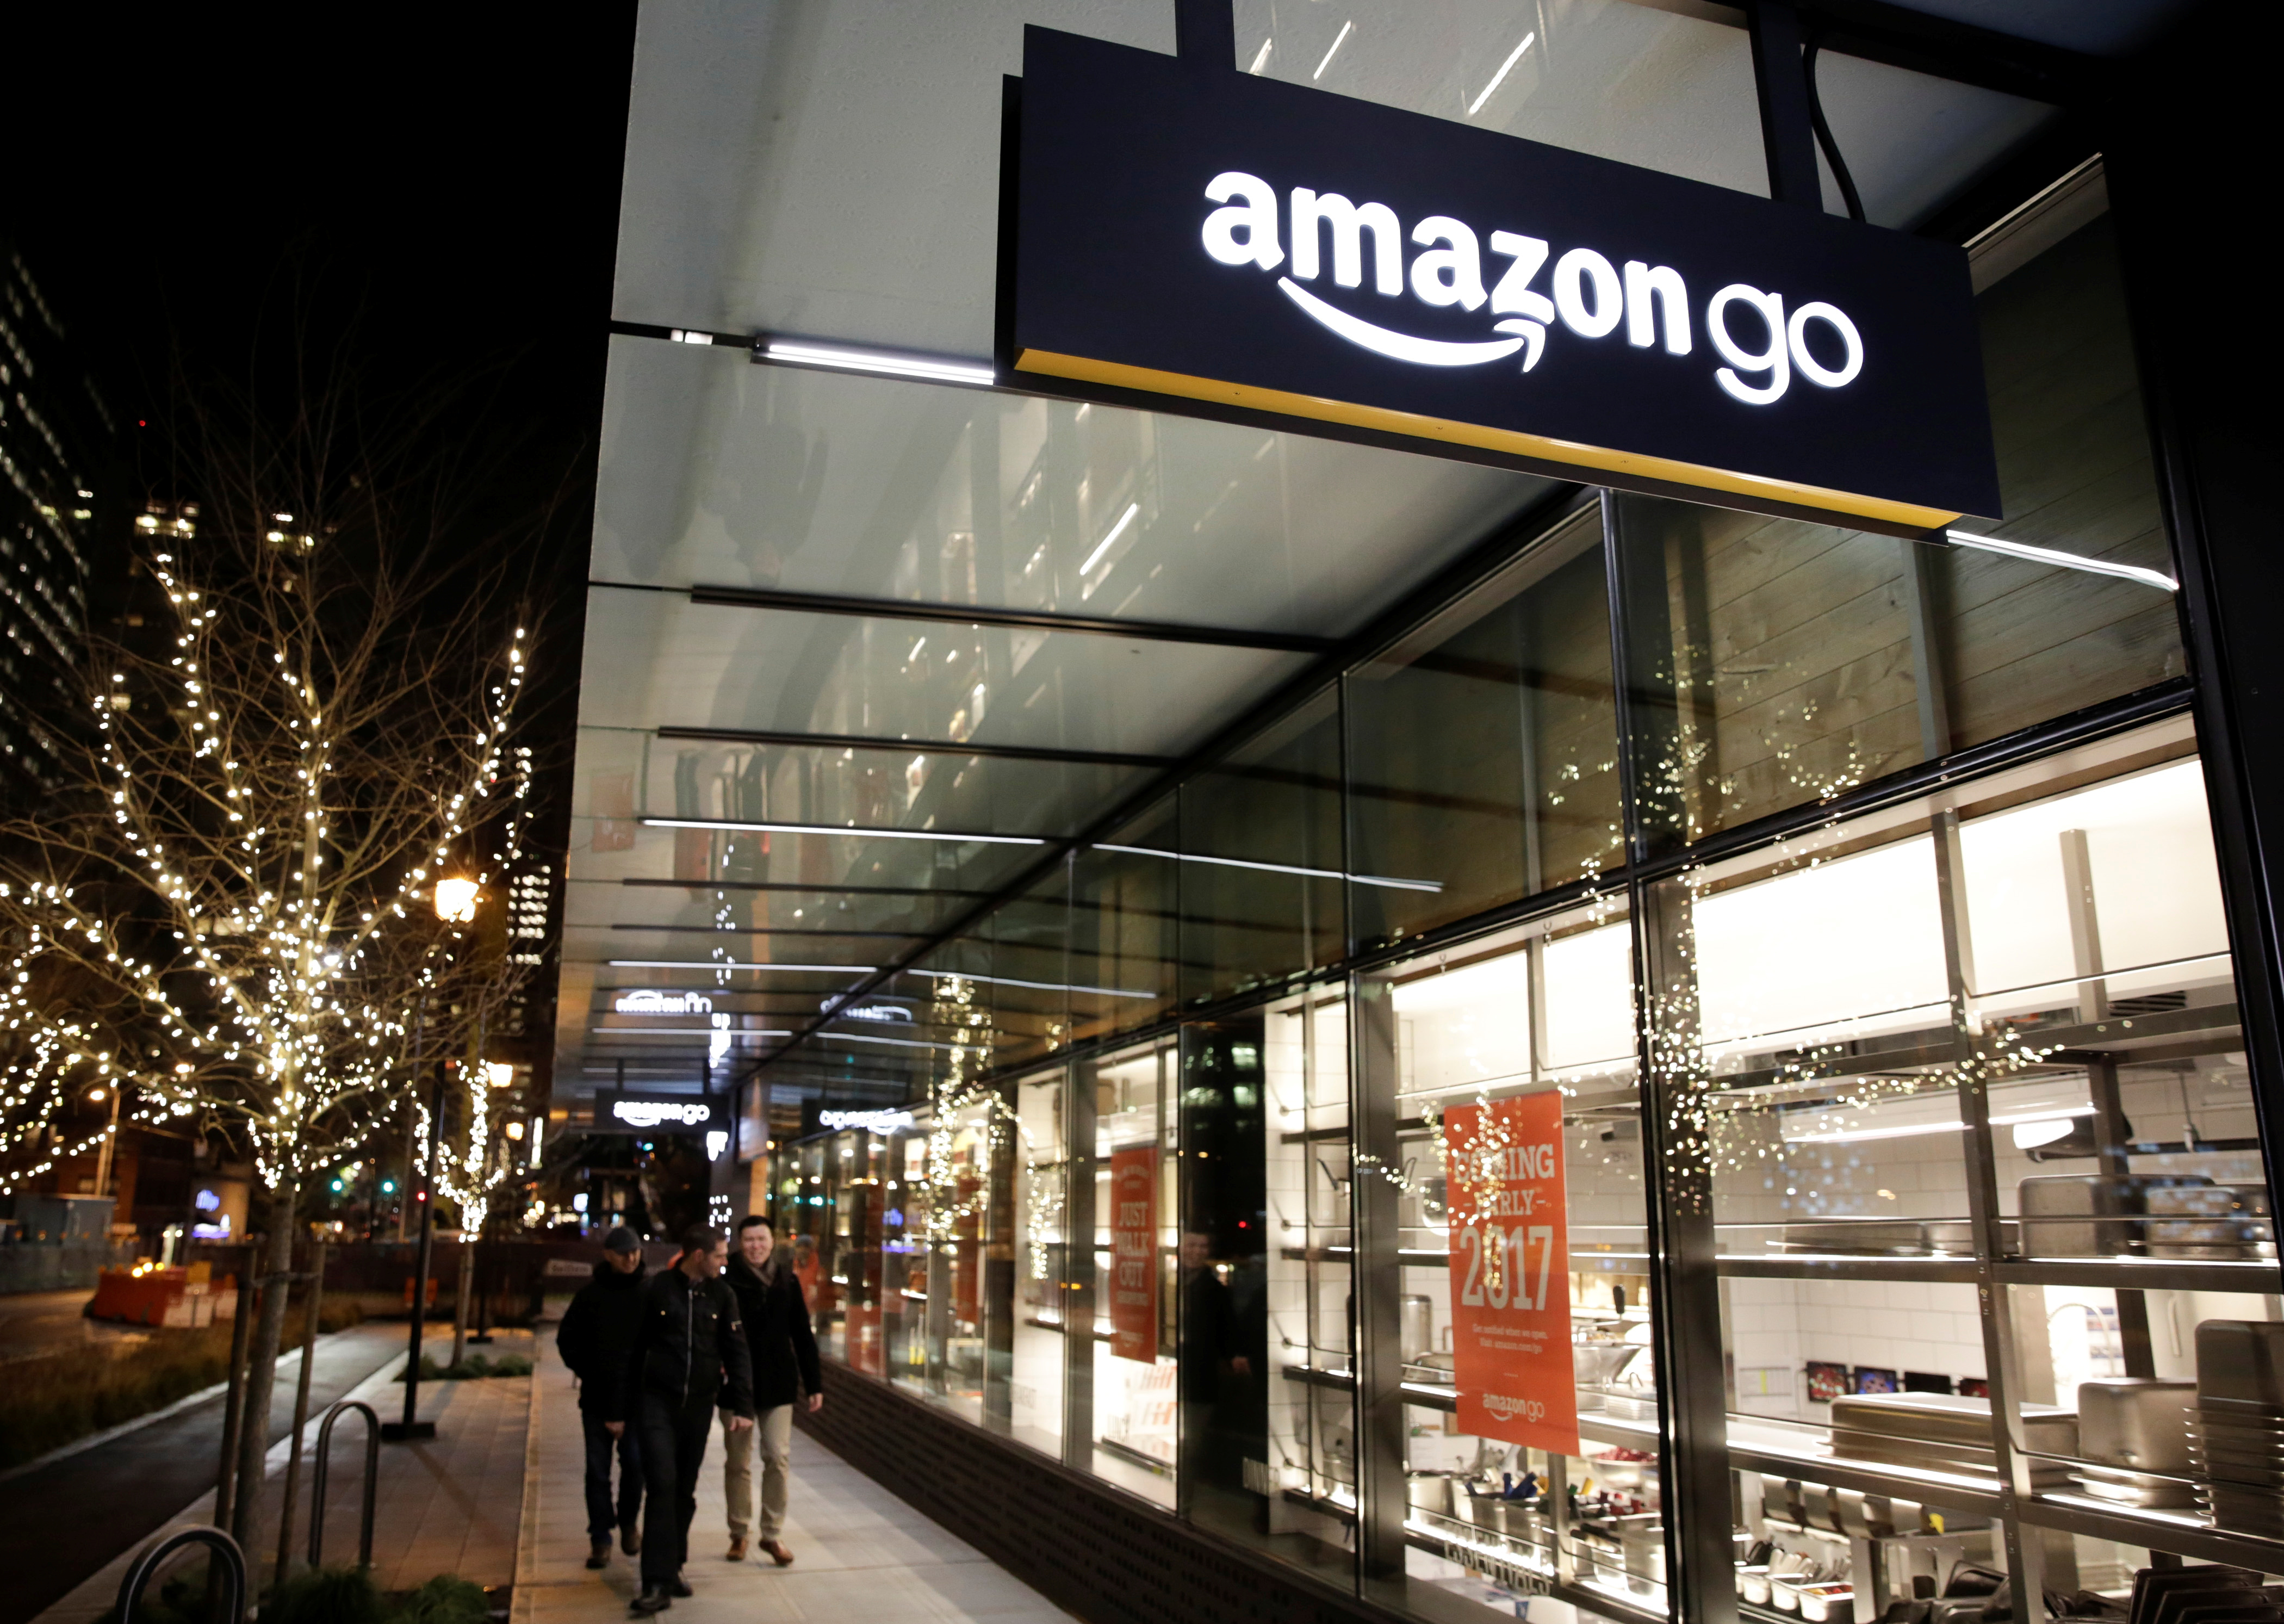 People walk by the Amazon Go brick-and-mortar grocery store without lines or checkout counters, in Seattle Washington, U.S. December 5, 2016. REUTERS/Jason Redmond - RTSUU23